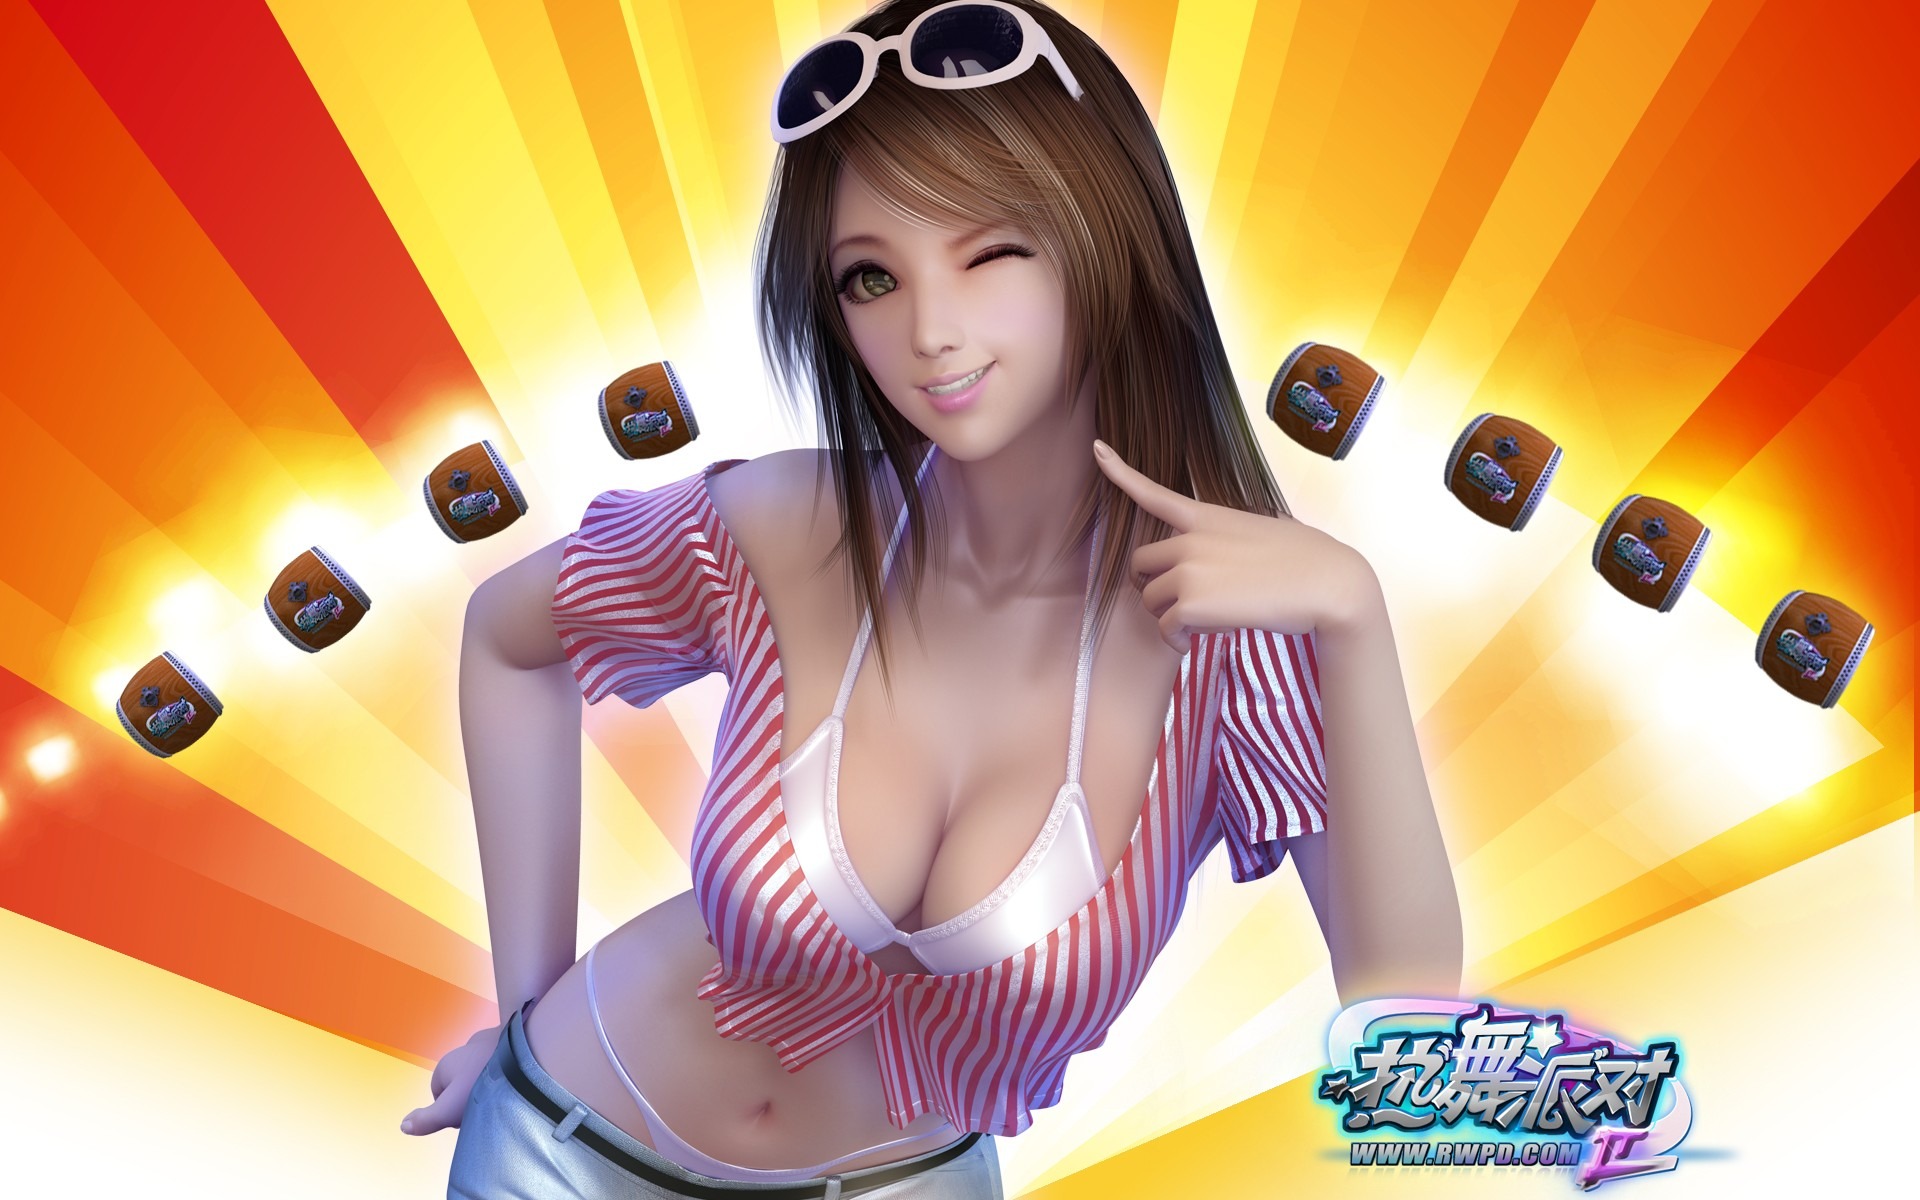 Online game Hot Dance Party II official wallpapers #19 - 1920x1200